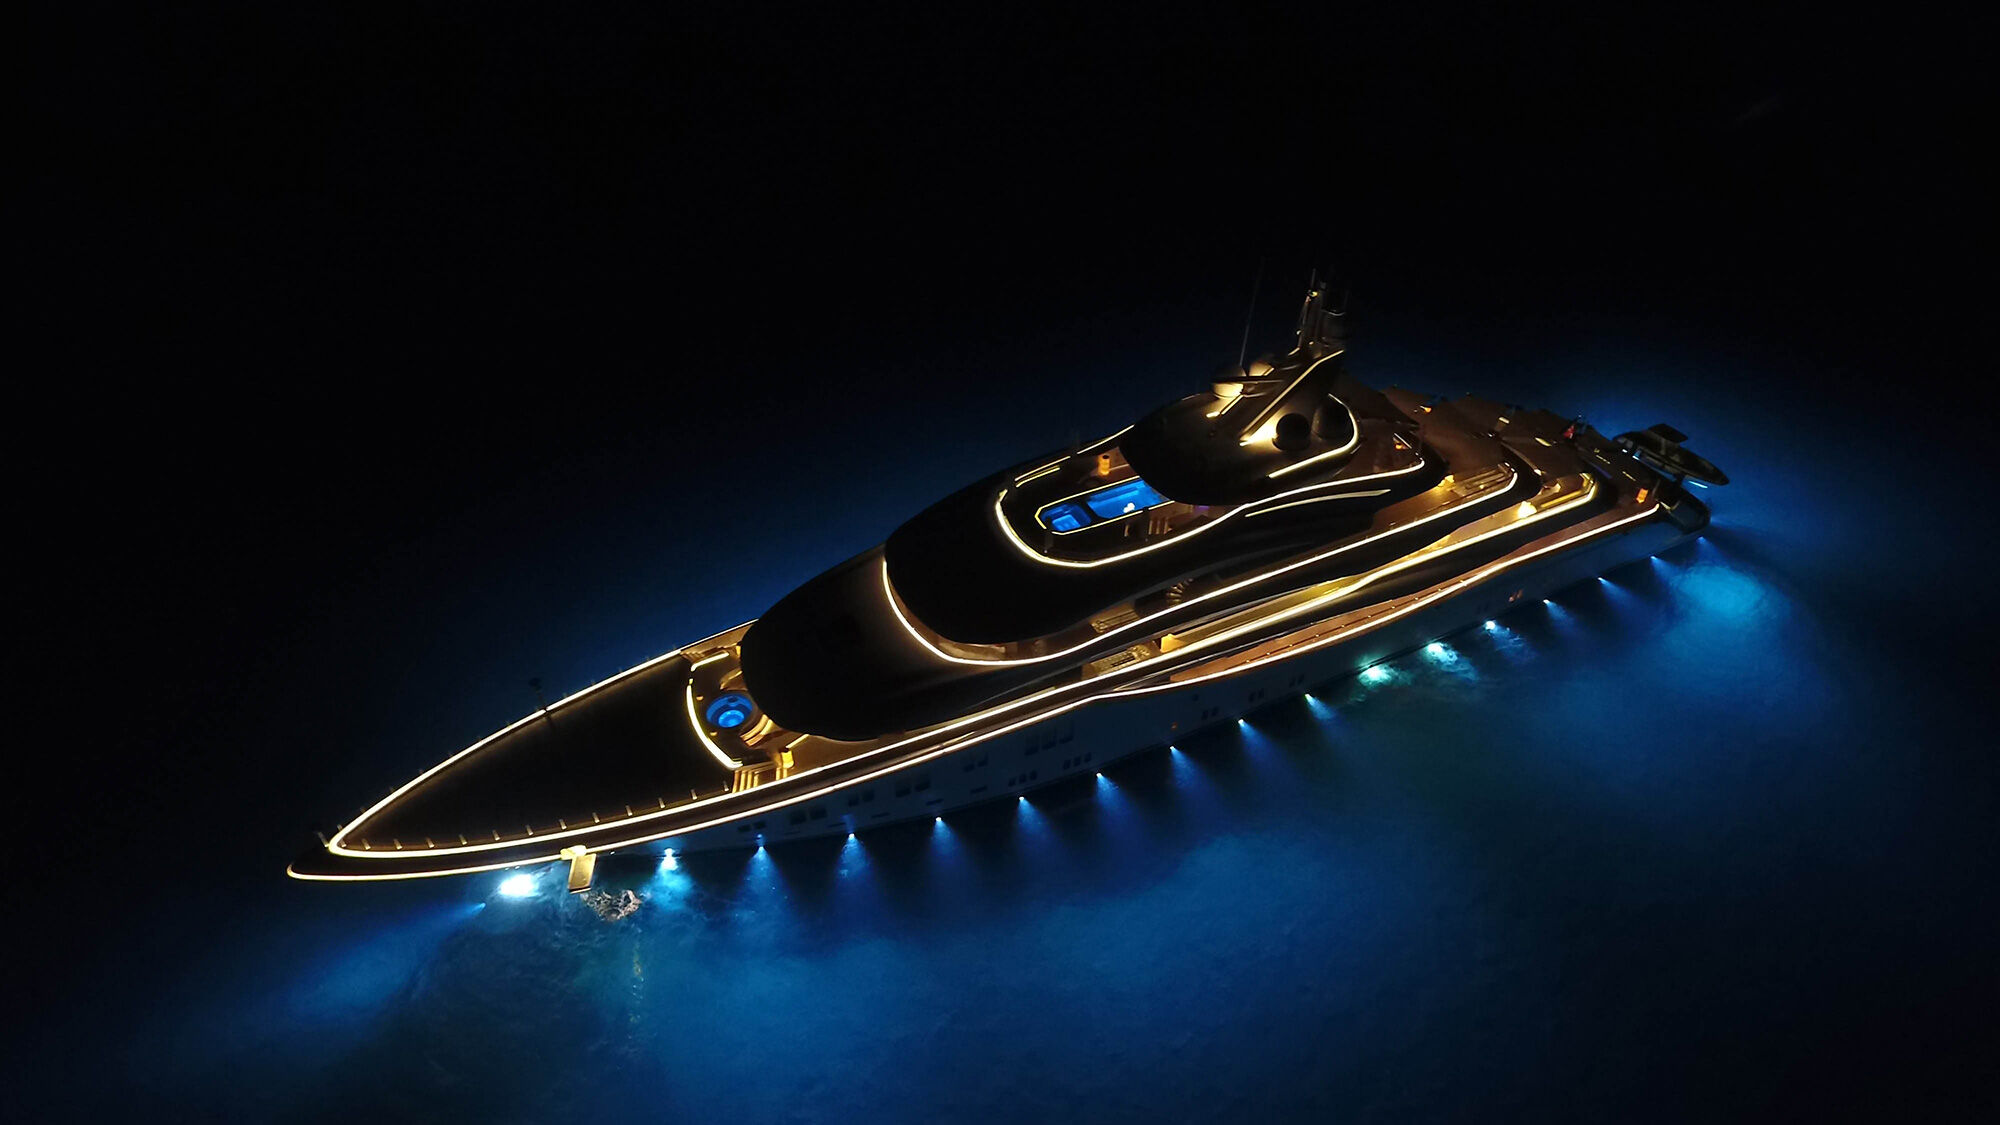 luxury motor yacht with deck lights on in the night